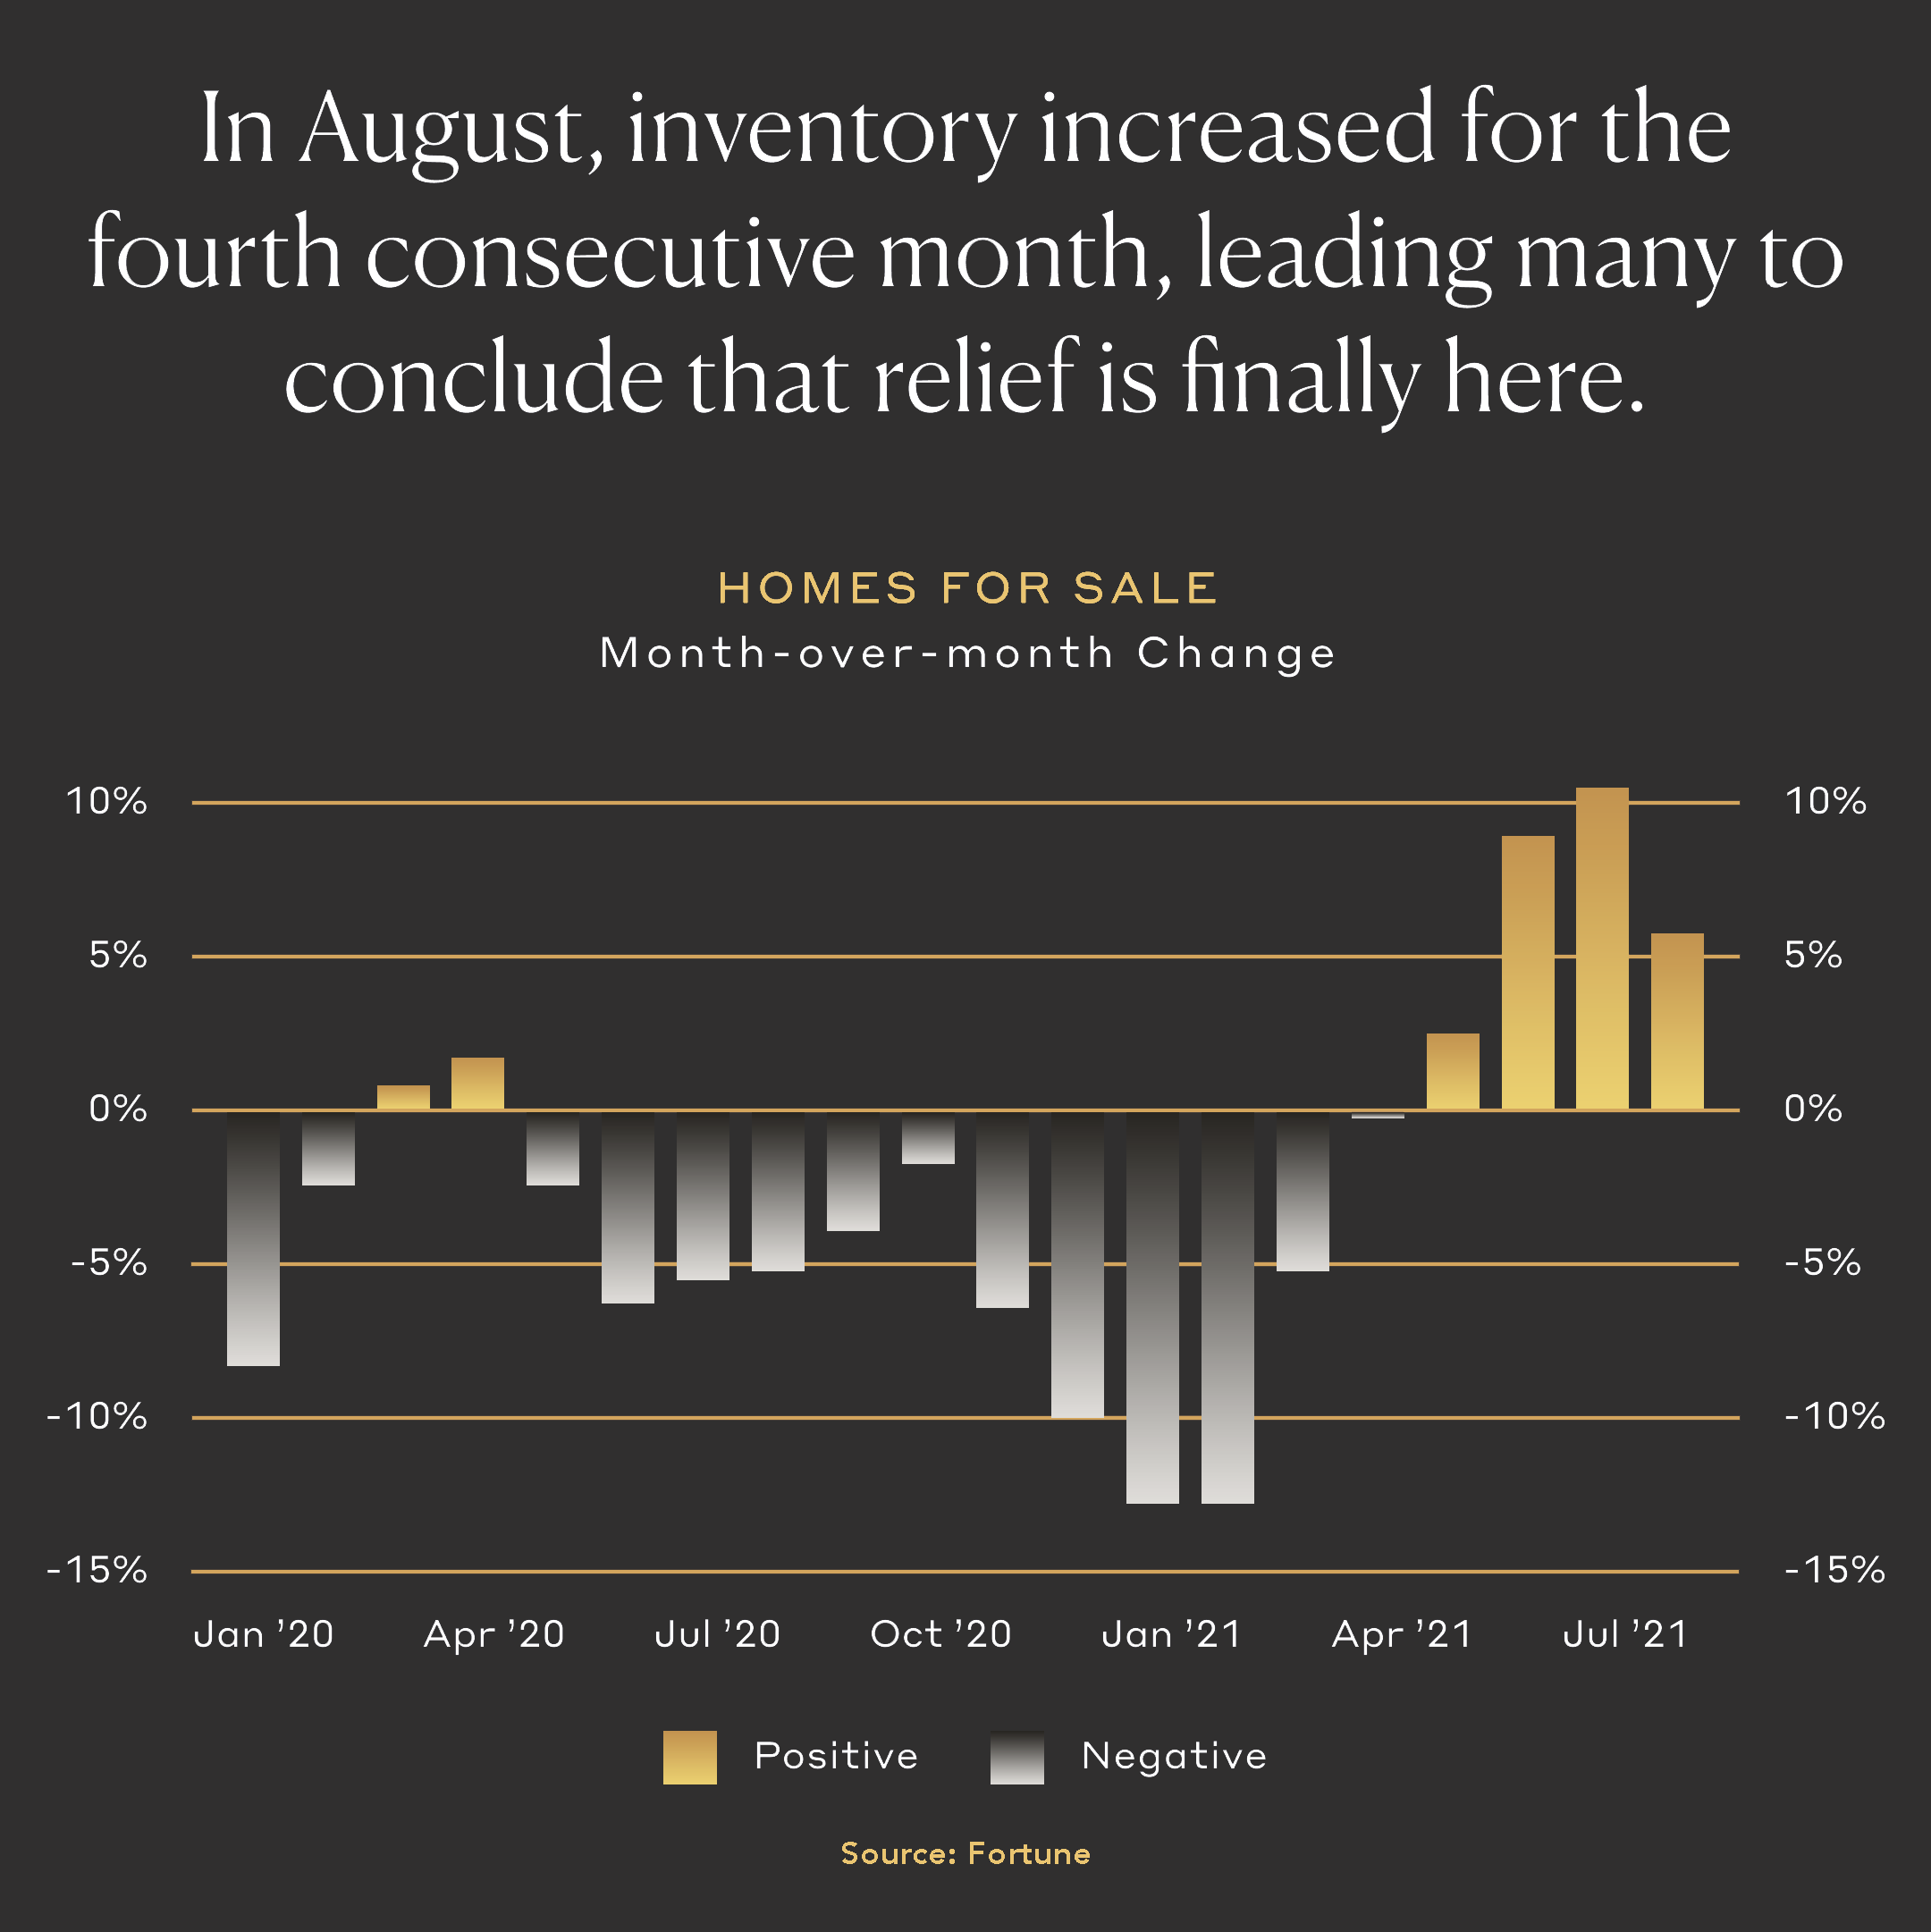 In August, inventory increased for the fourth consecutive month, leading many to conclude that relief is finally here.